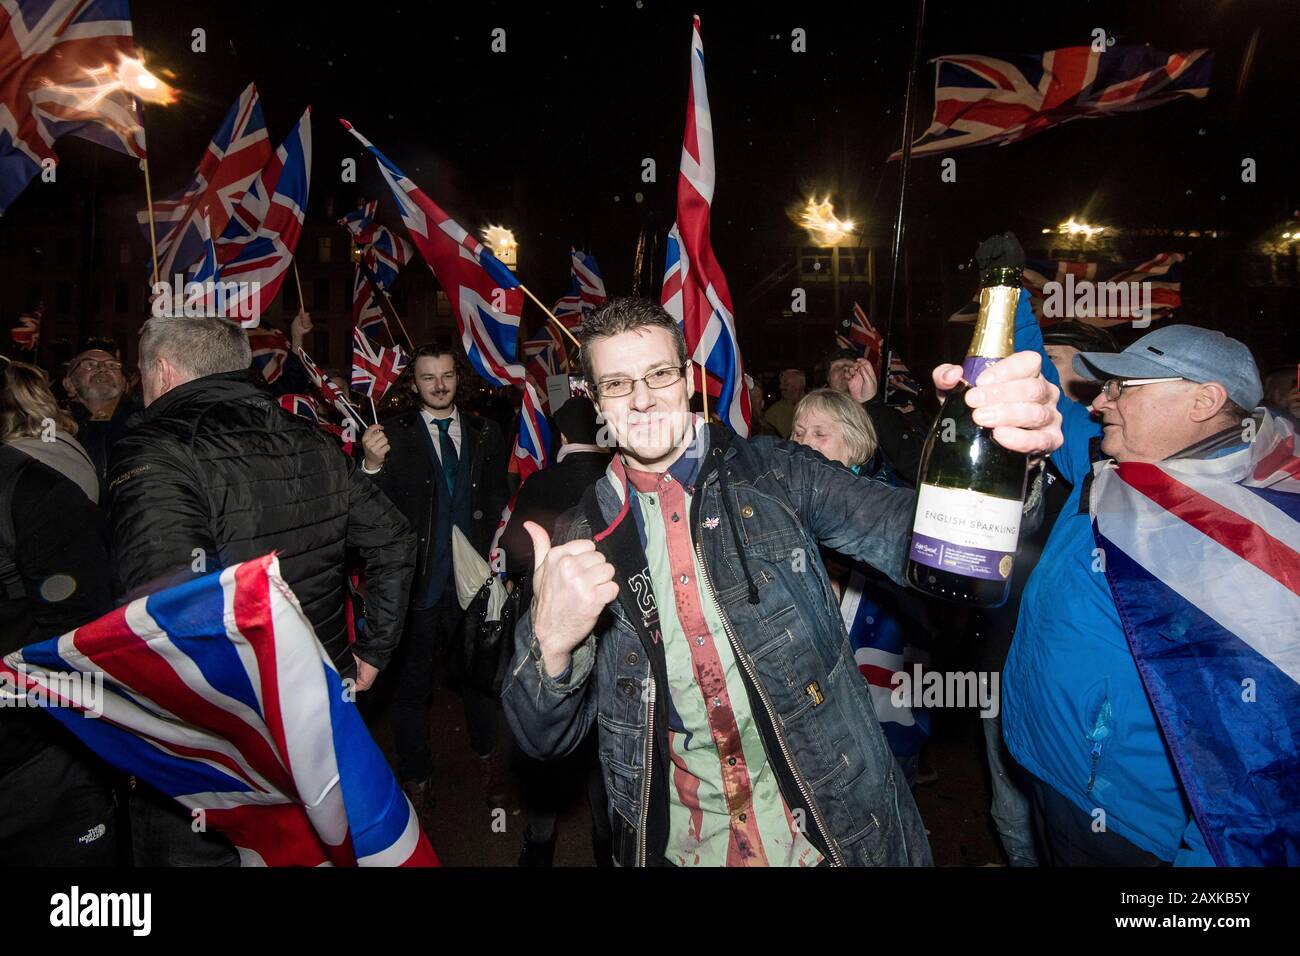 Ex-UKIP member Alistair McConnachie leads the celebrations in George Square in Glasgow as the U.K leaves the European Union    Credit: Euan Cherry Stock Photo